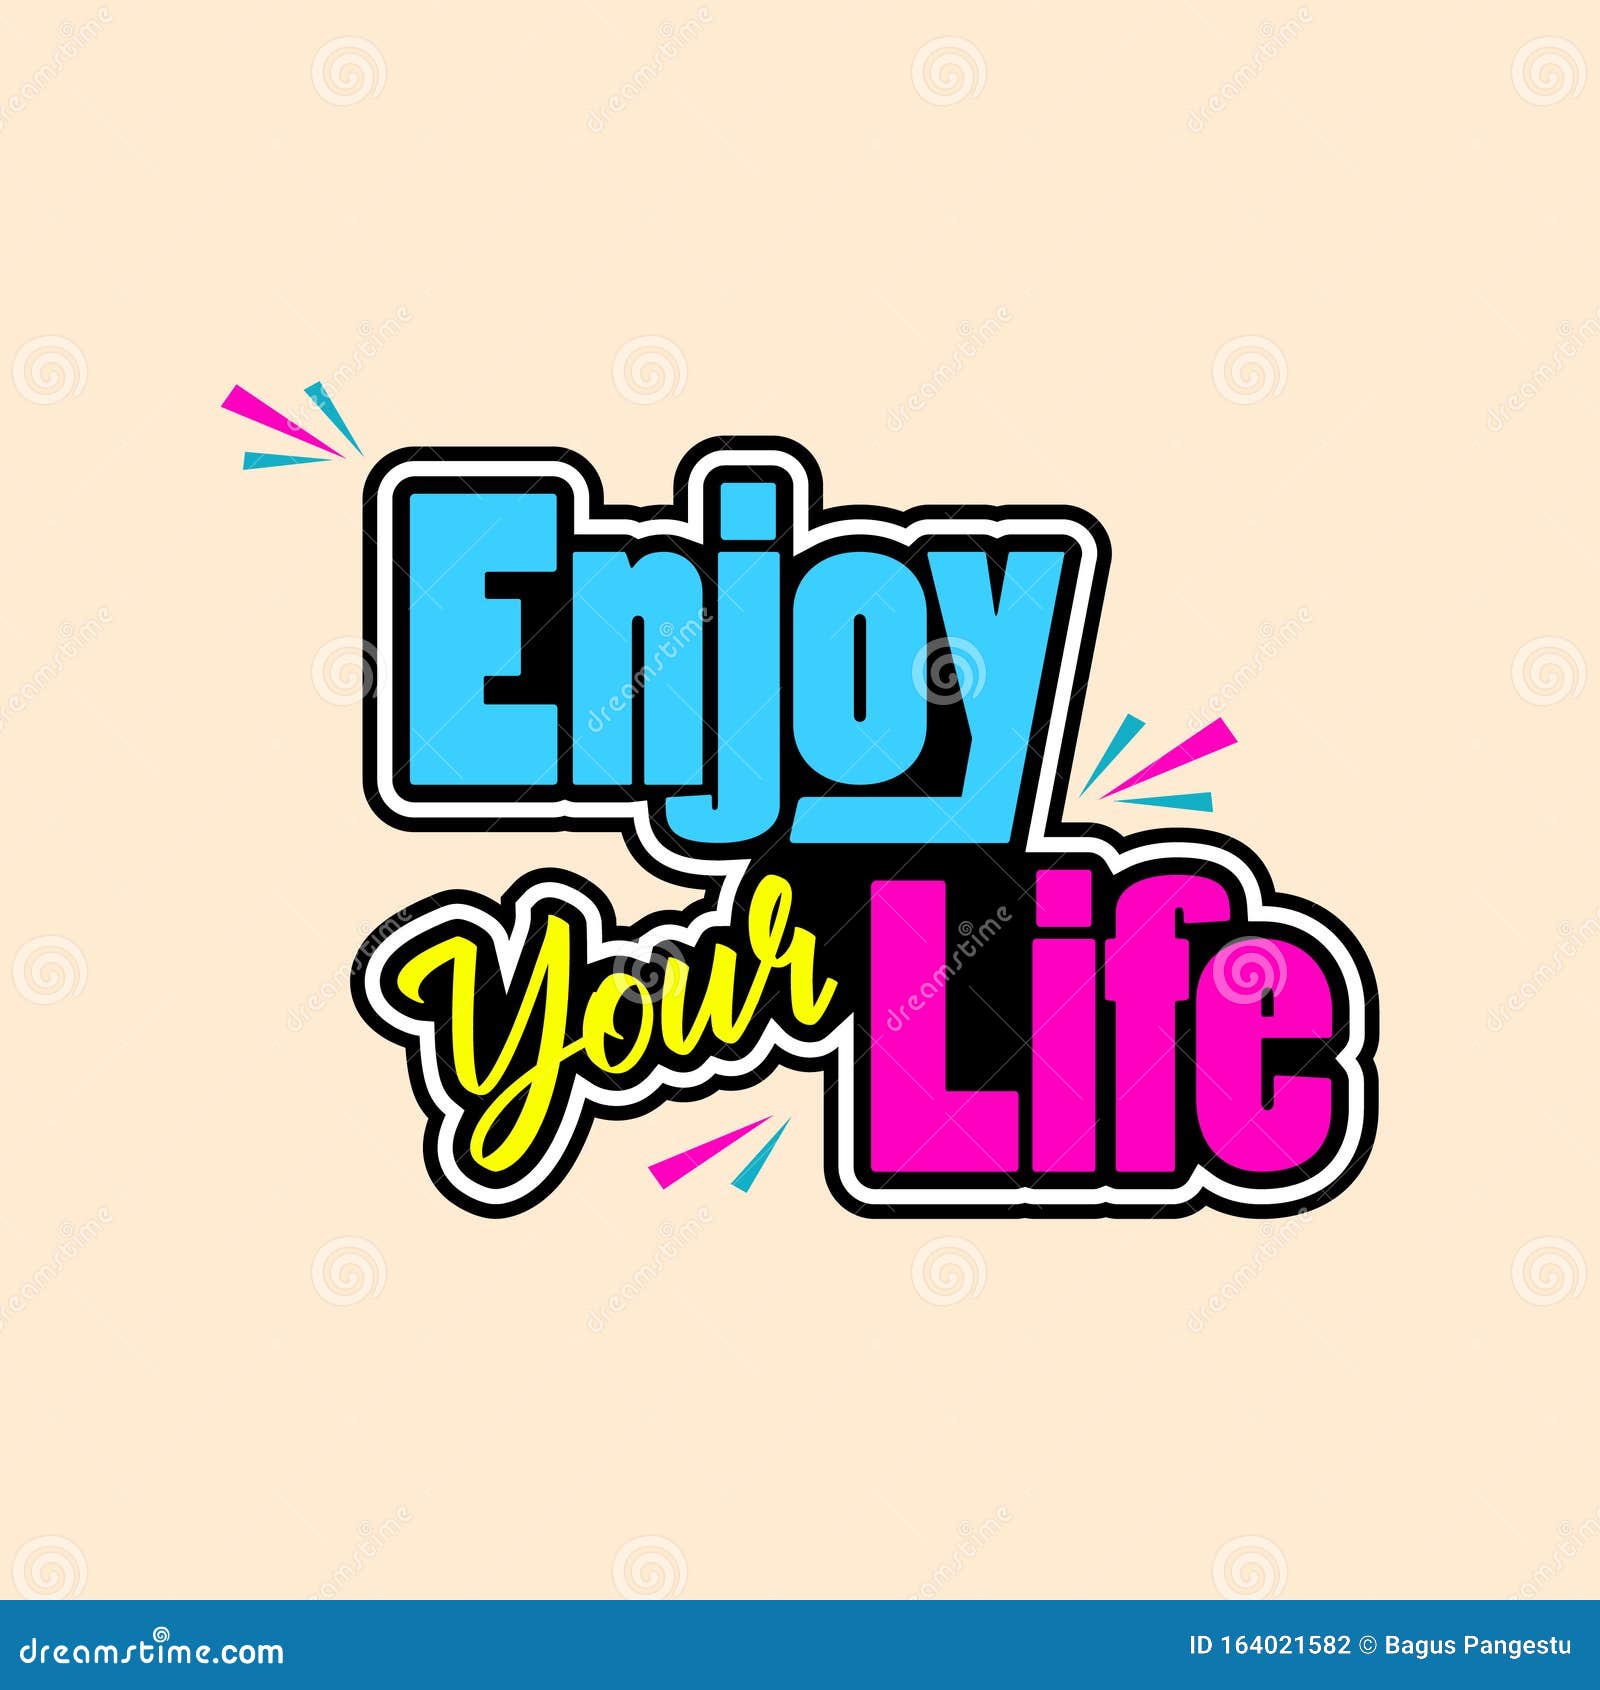 enjoy your life images